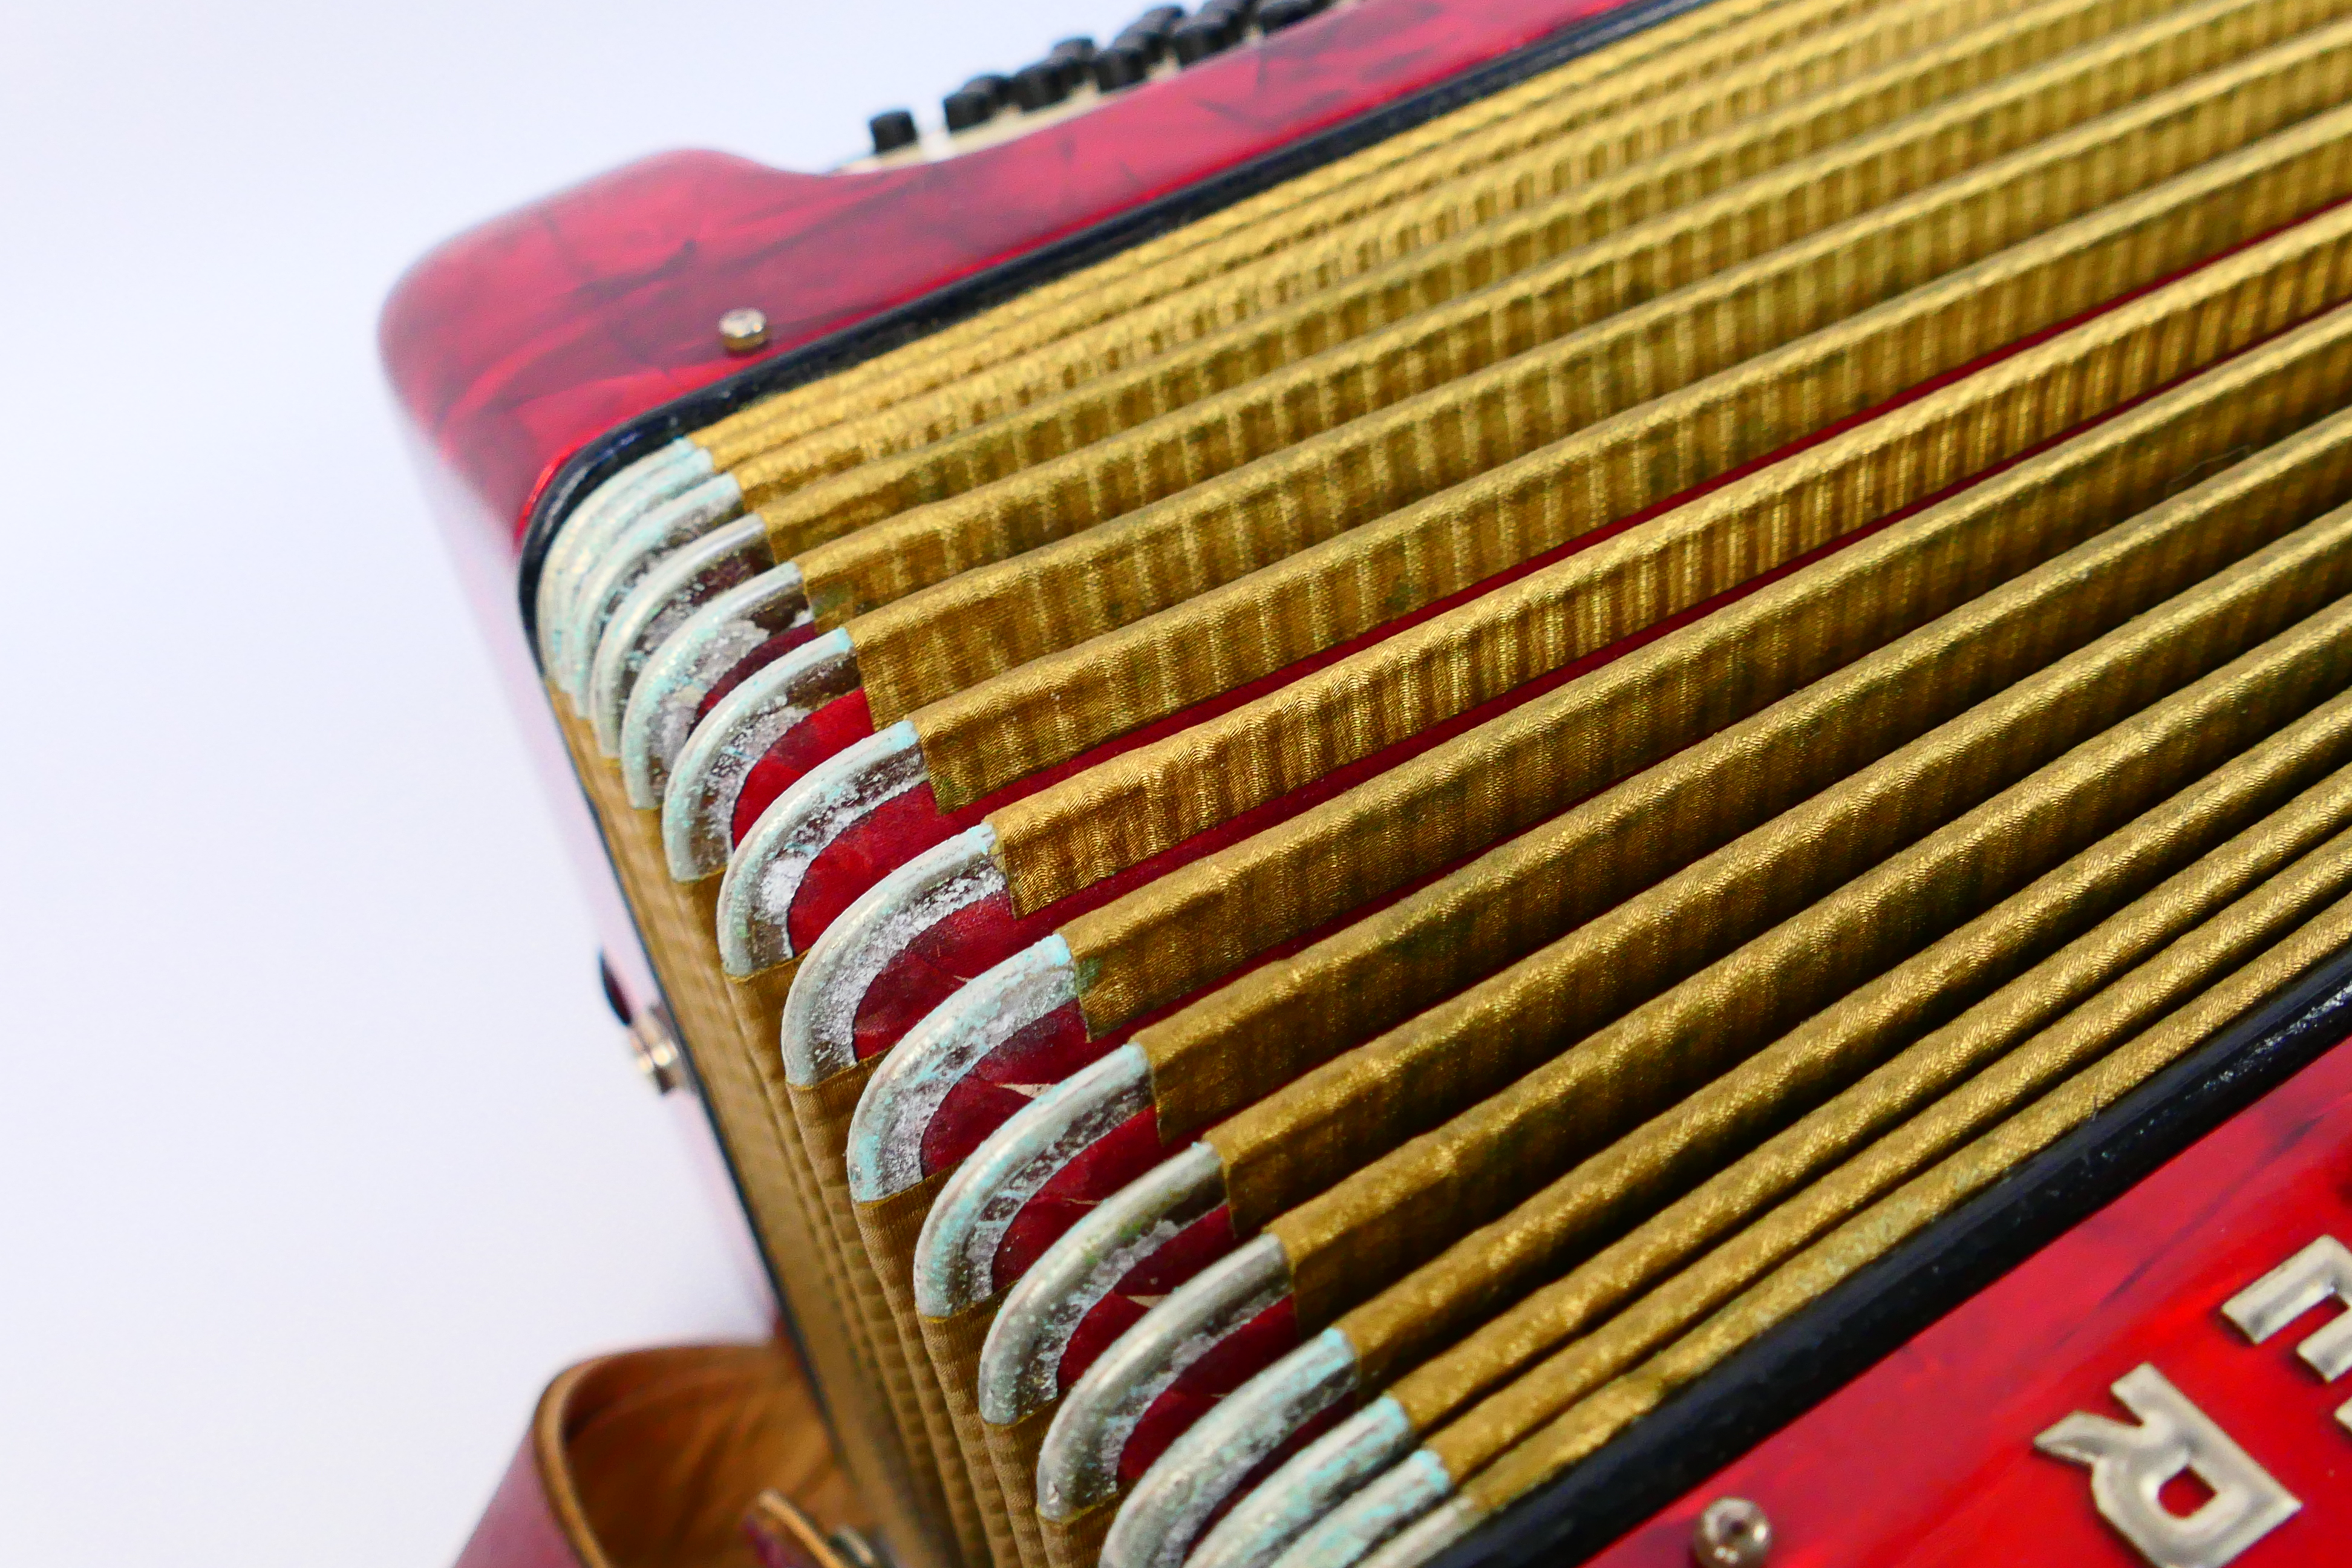 A vintage Hohner Verdi VM piano accordion, 41 keys and 120 basses, marbled red finish, - Image 16 of 18